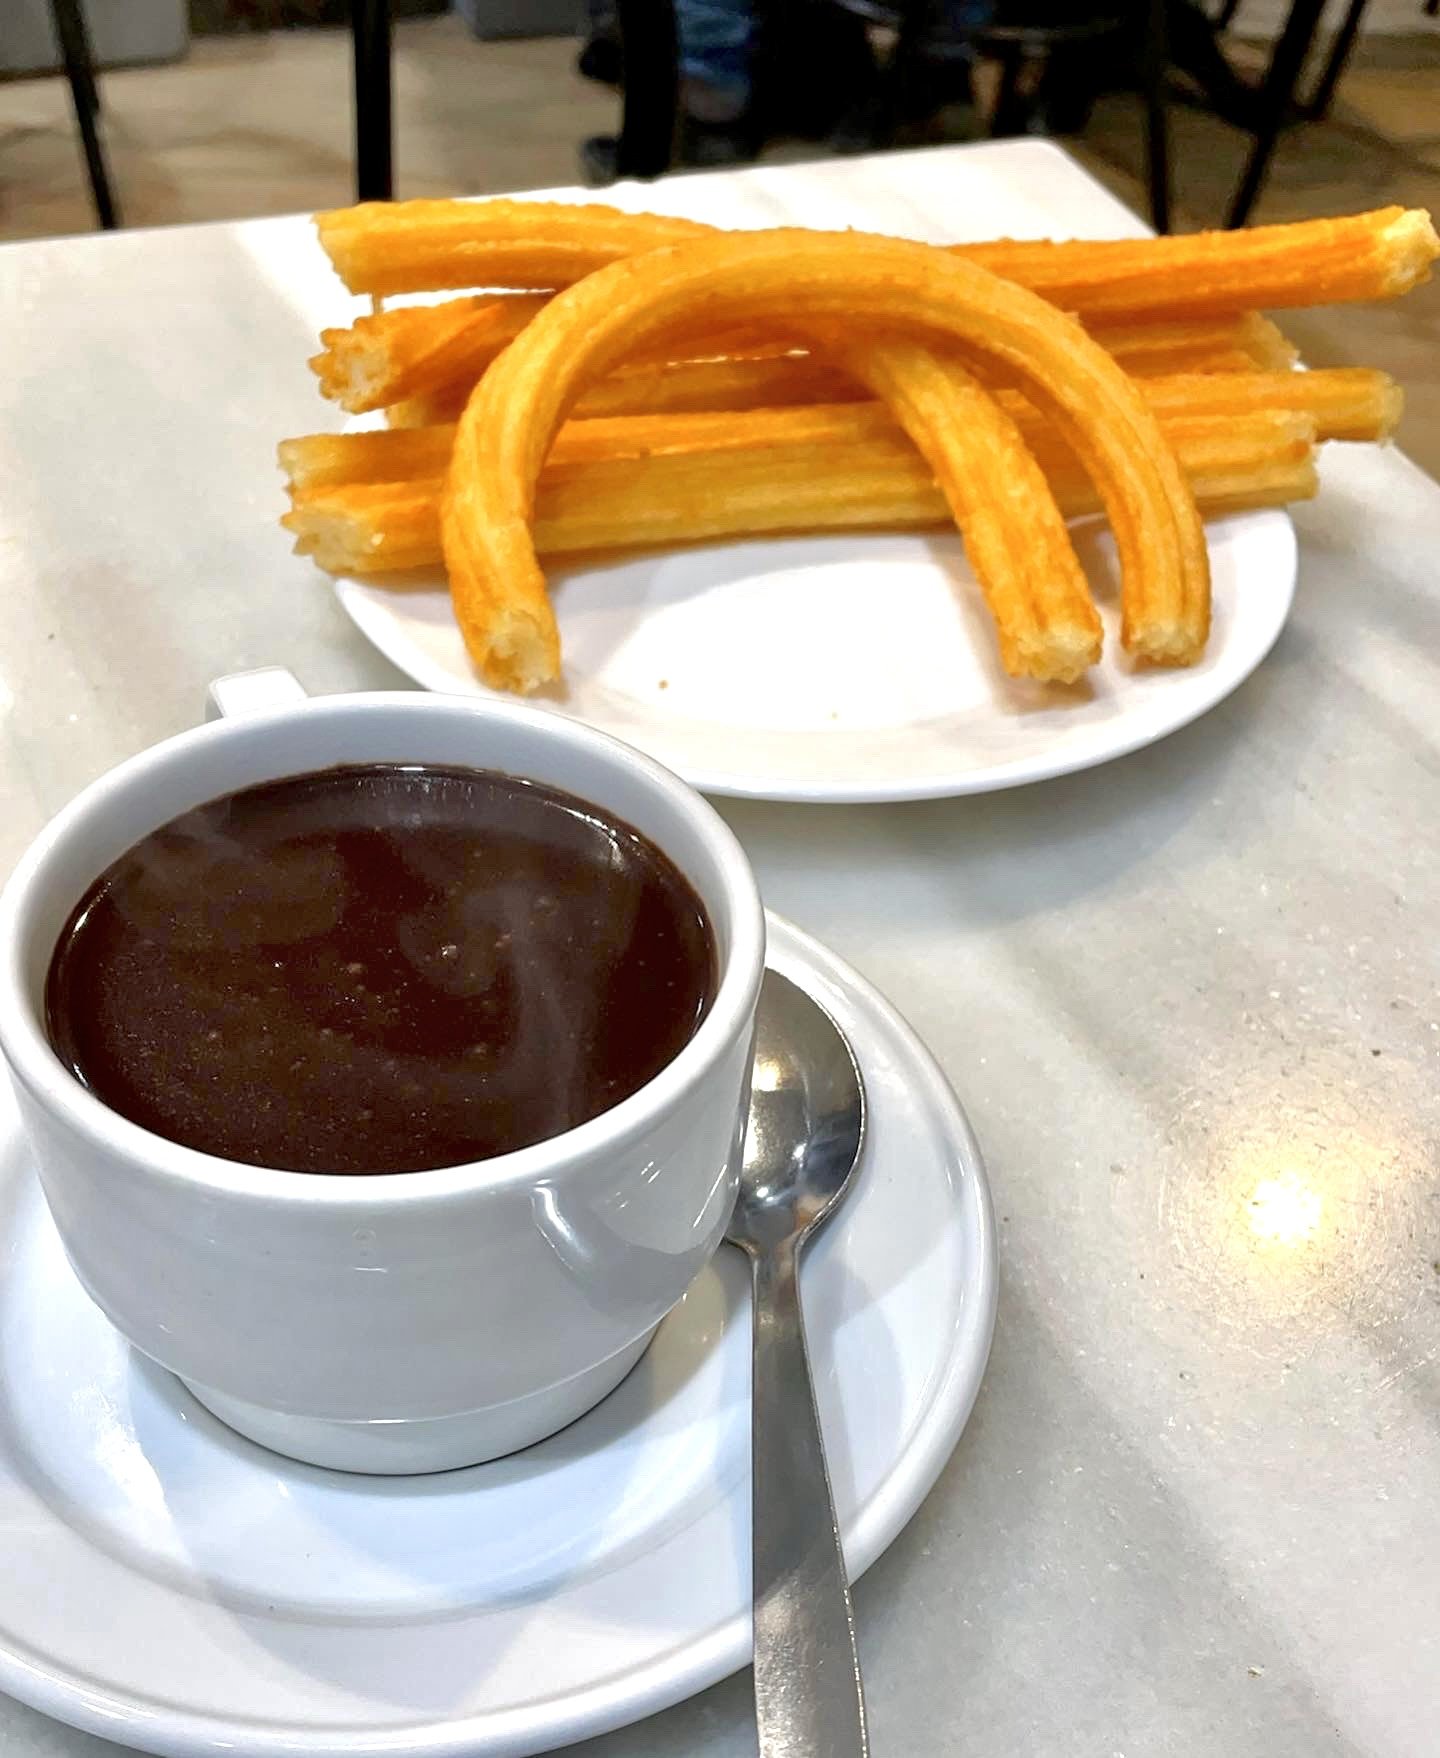 Chocolate with 6 Churros